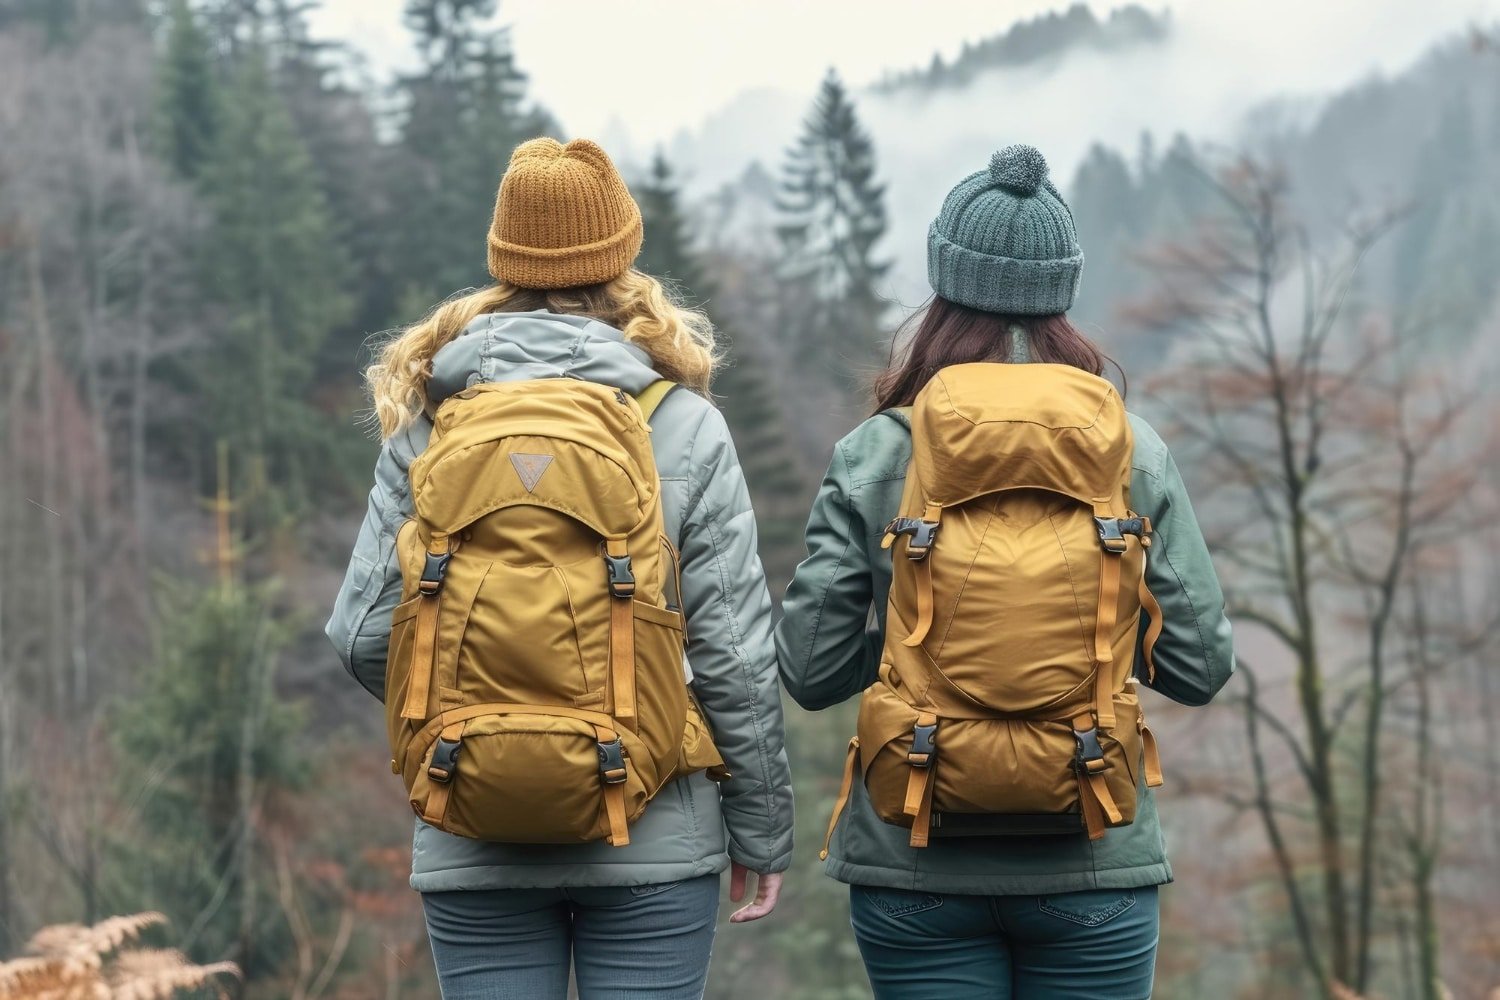 You are currently viewing Stylish Backpacks by Adventurist Backpack Co.